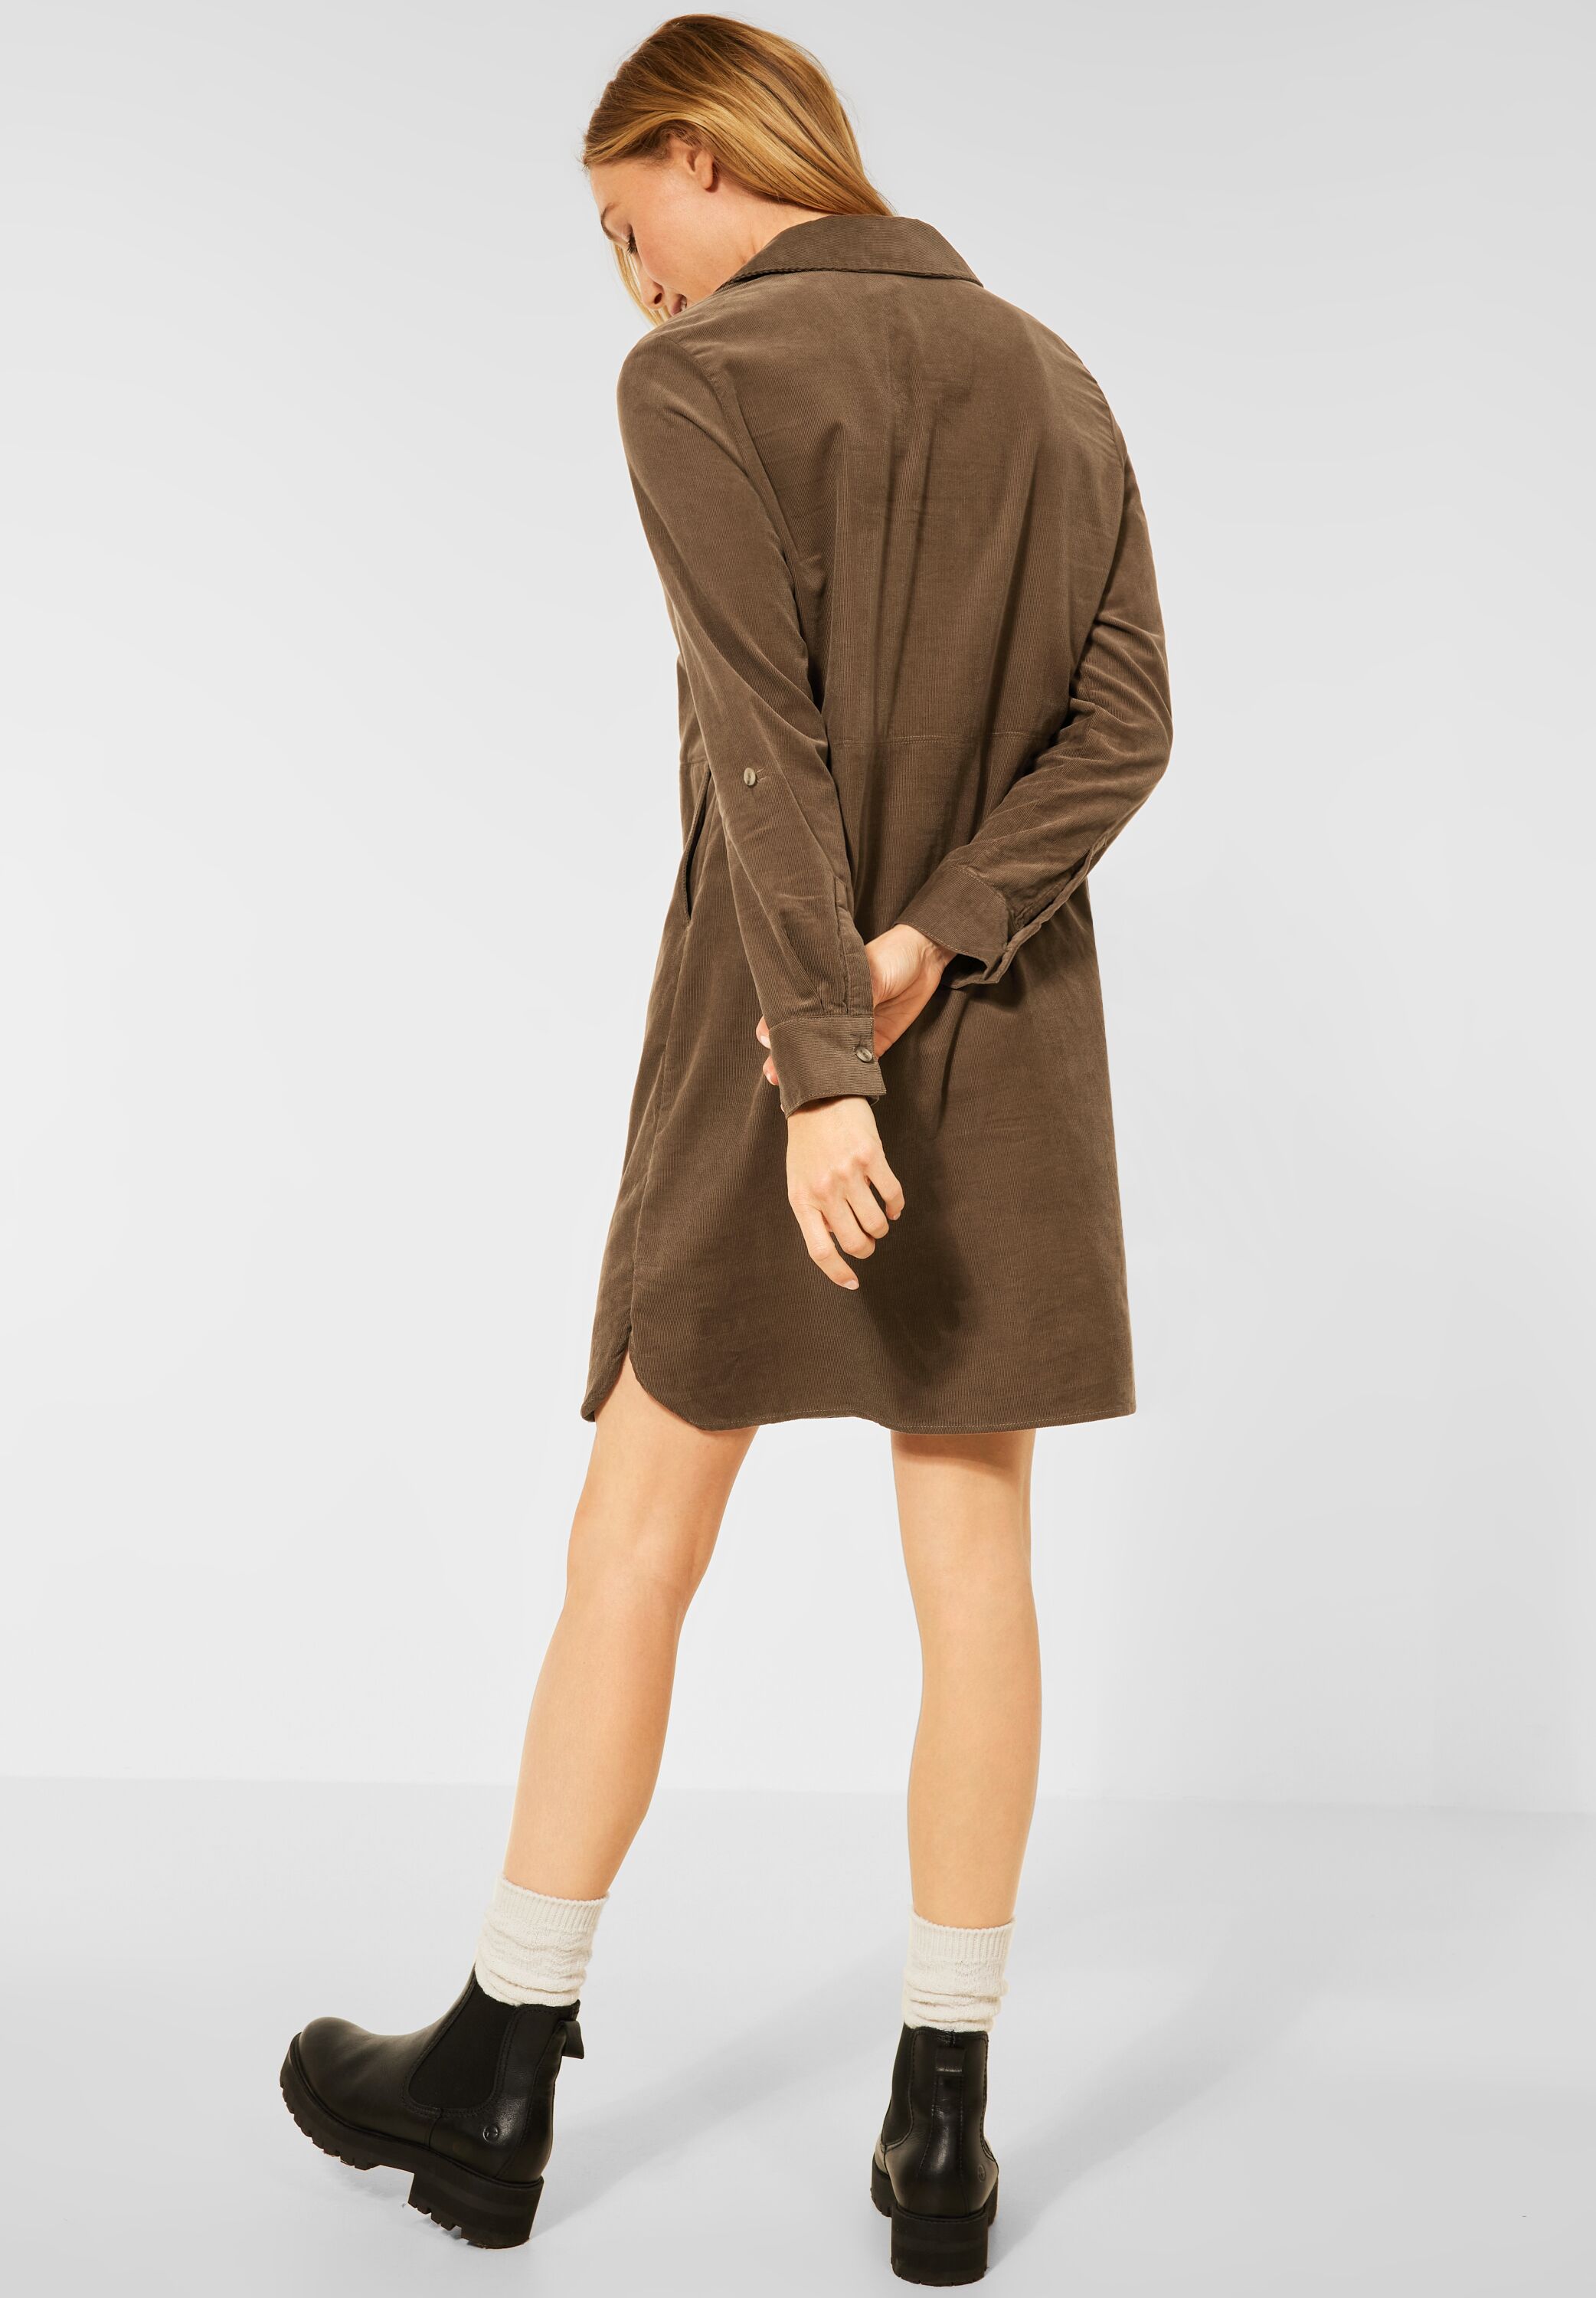 CECIL Kleid in Toffee Brown B143055-13294 - Mode CONCEPT